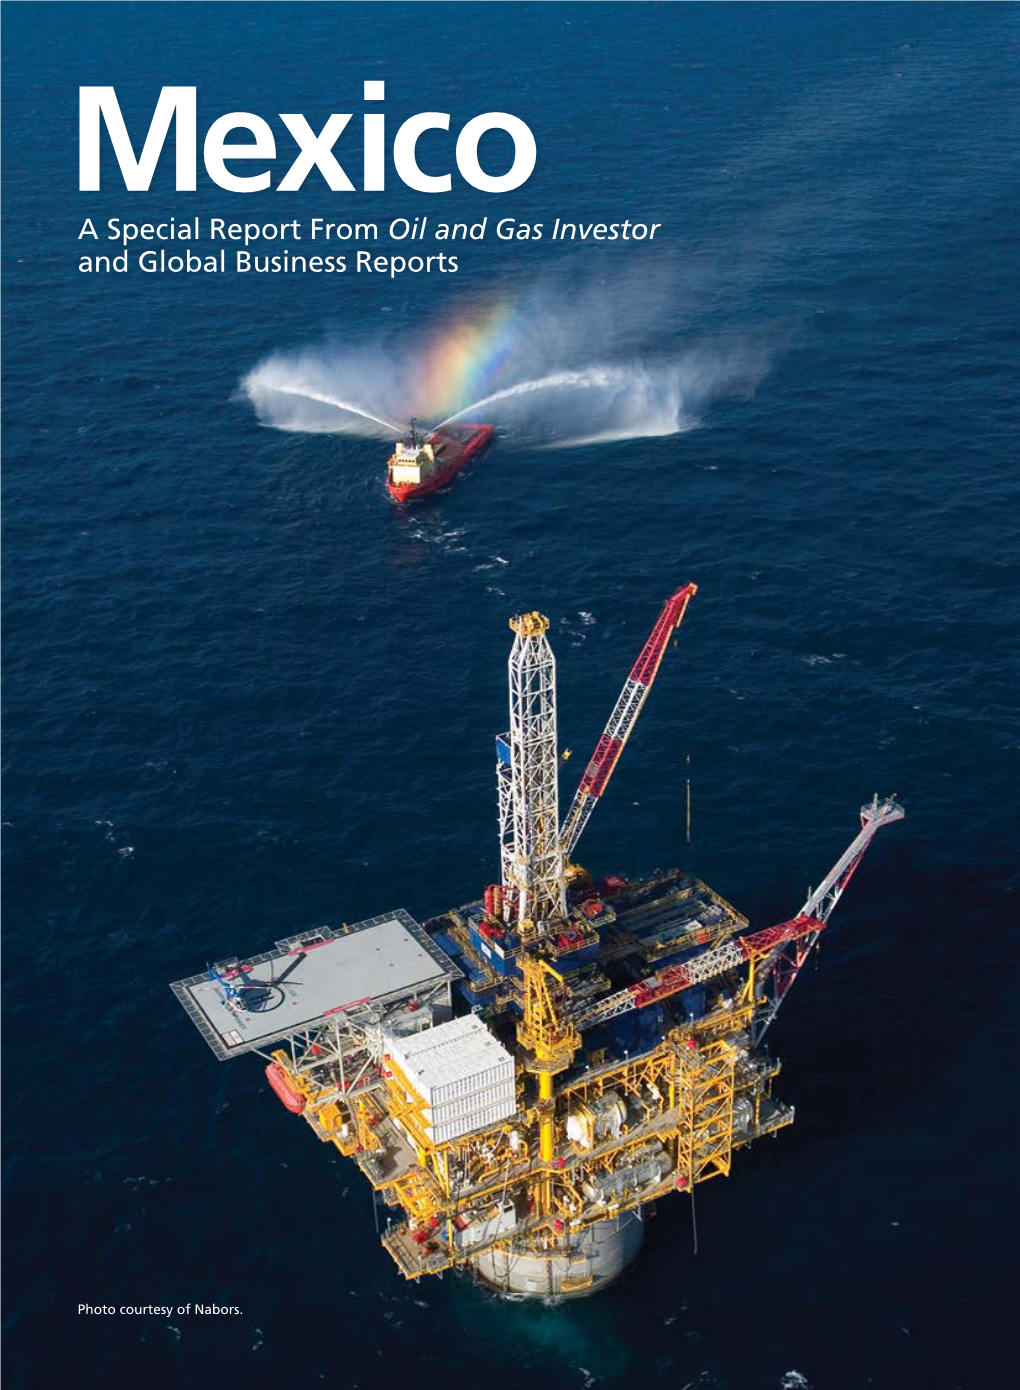 A Special Report from Oil and Gas Investor and Global Business Reports